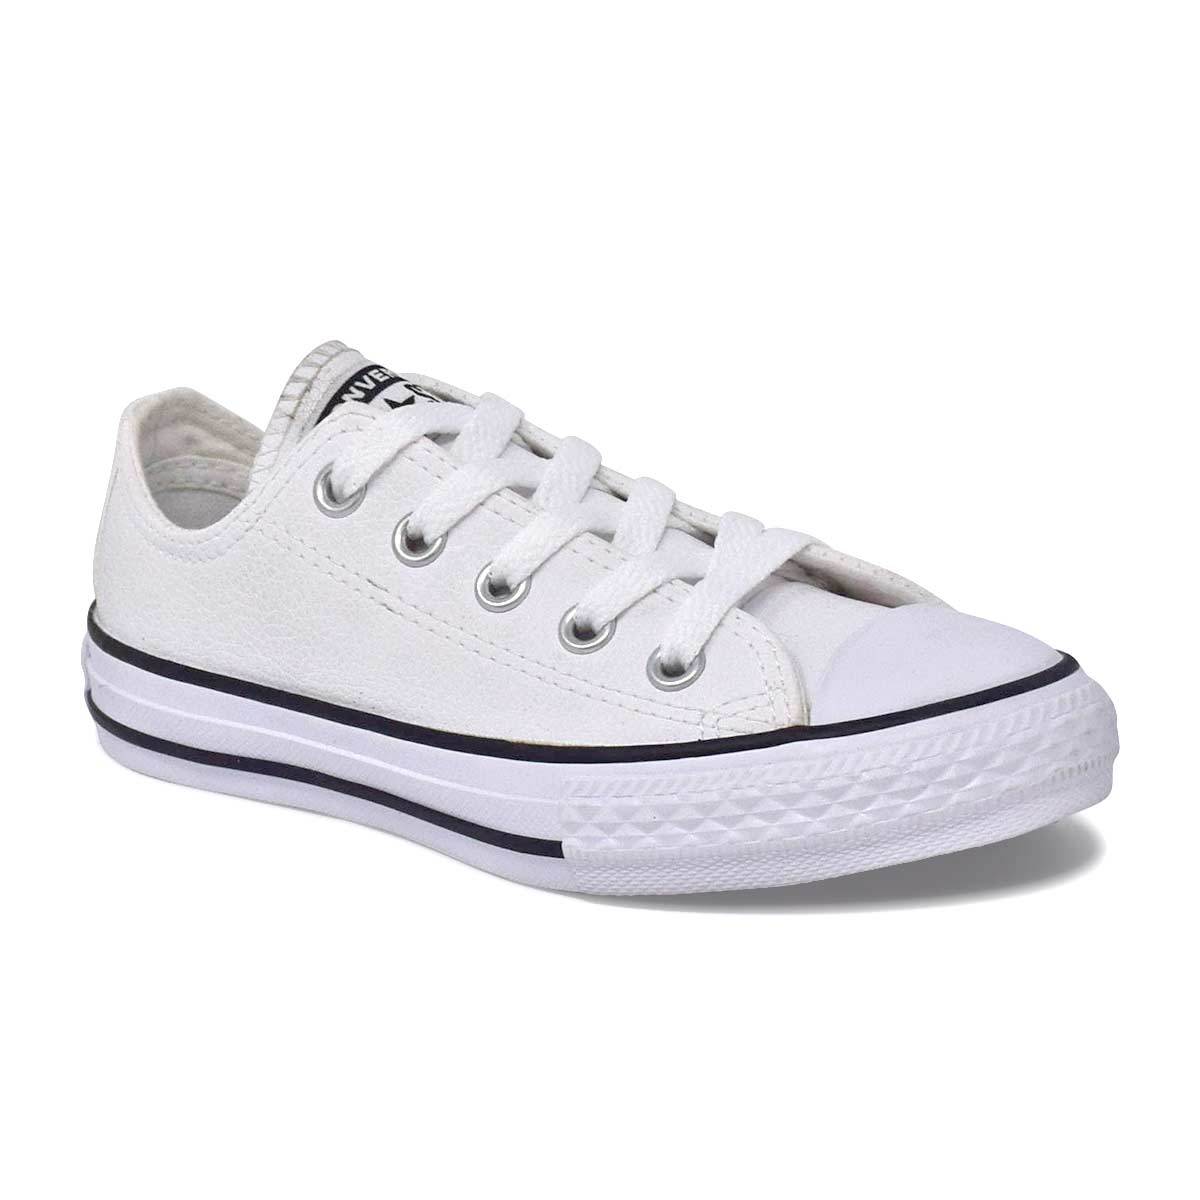 Little Kids Chuck Taylor White Leather